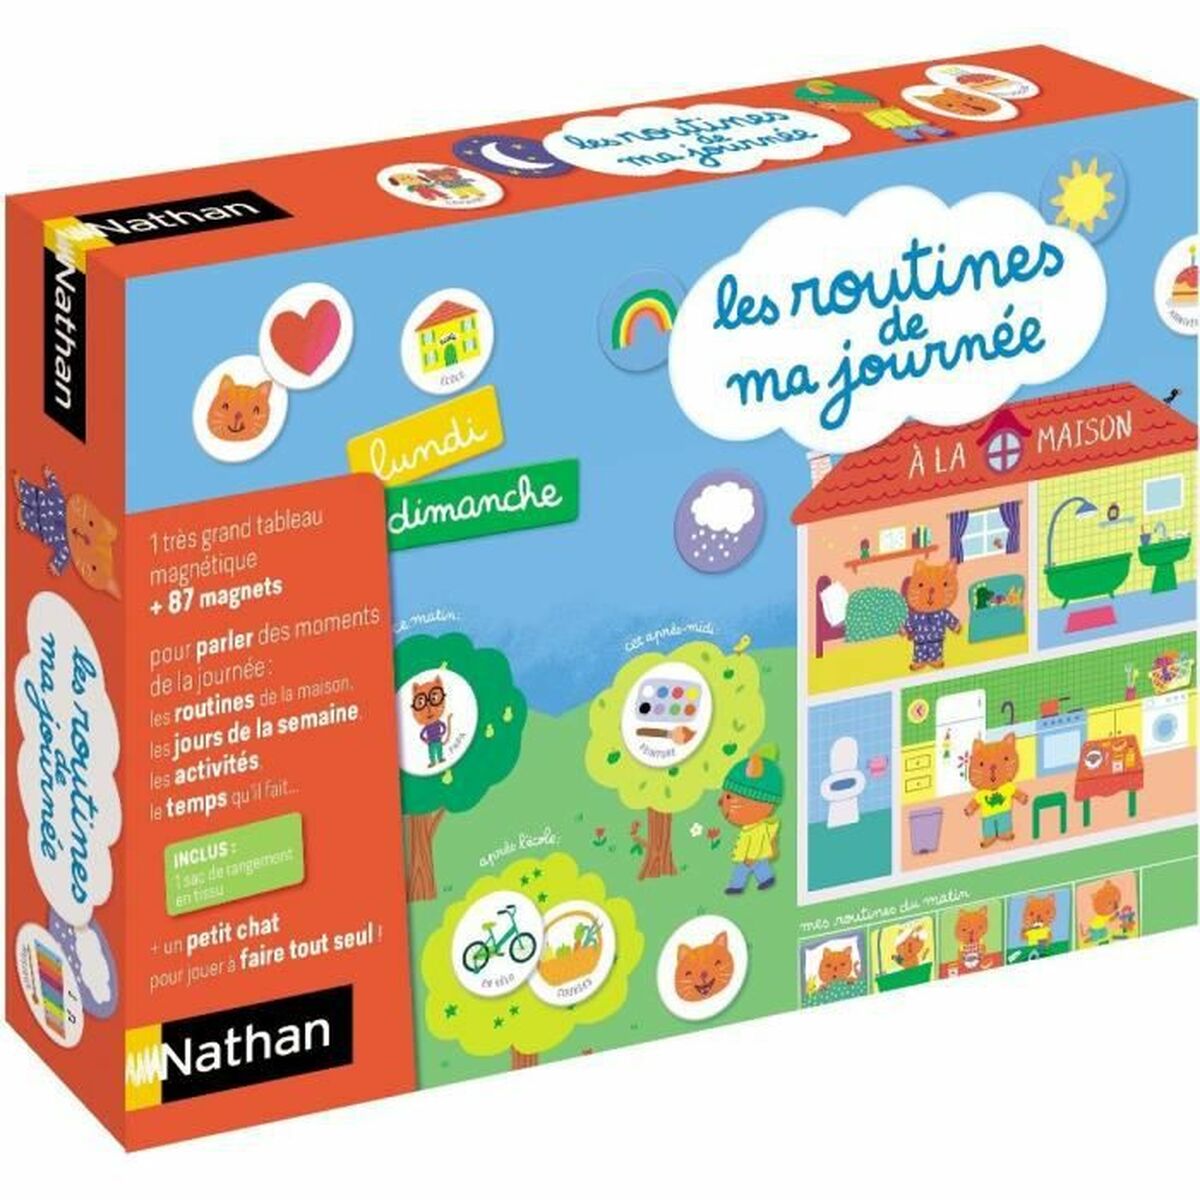 Board game Nathan 31556 (FR) Magnetic Multicolour (French) (Refurbished A)